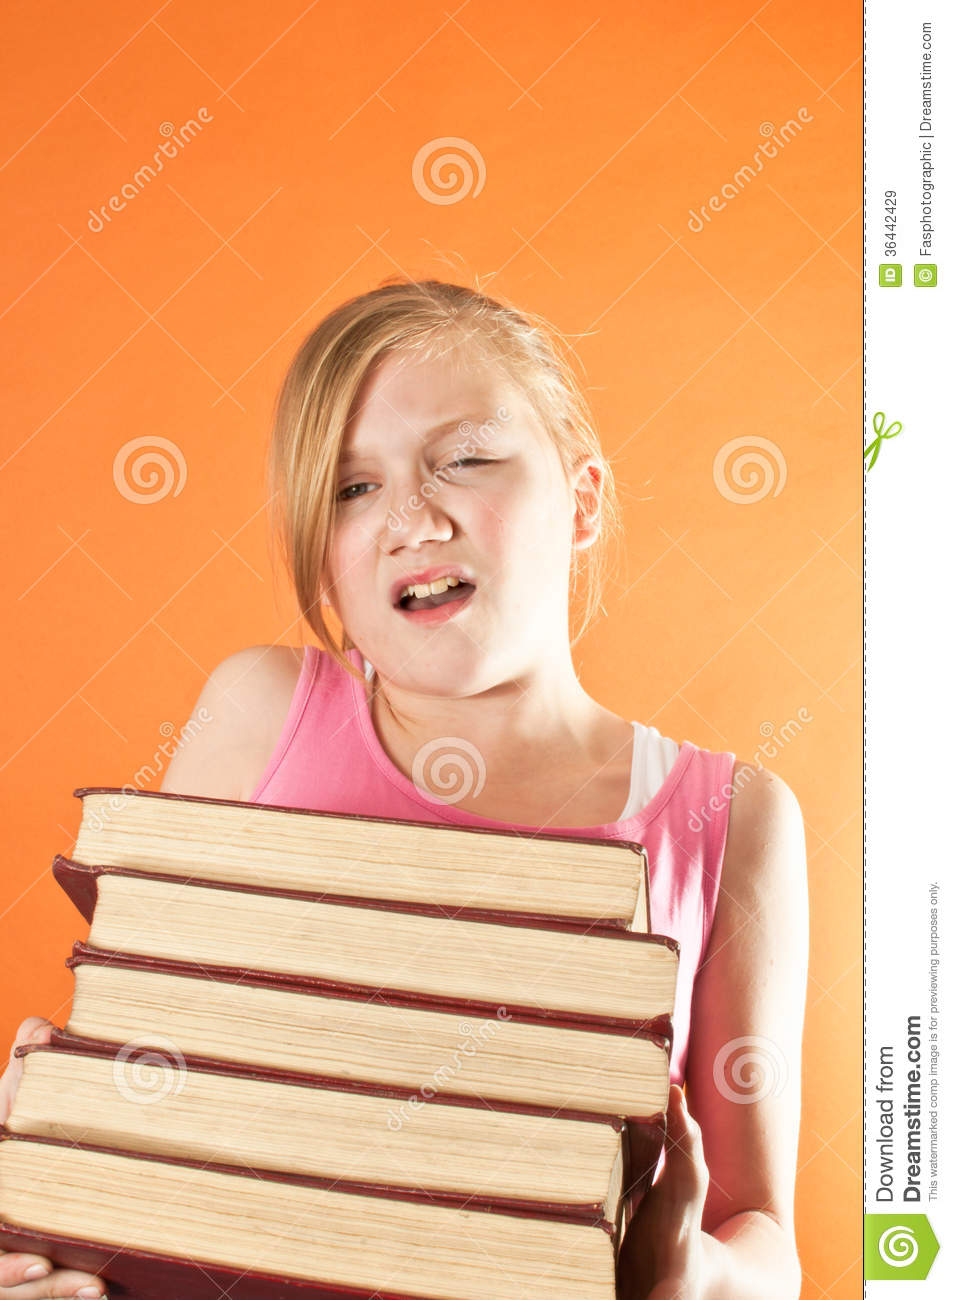 Student Struggling With A Stack Of Books Royalty Free Stock Images    